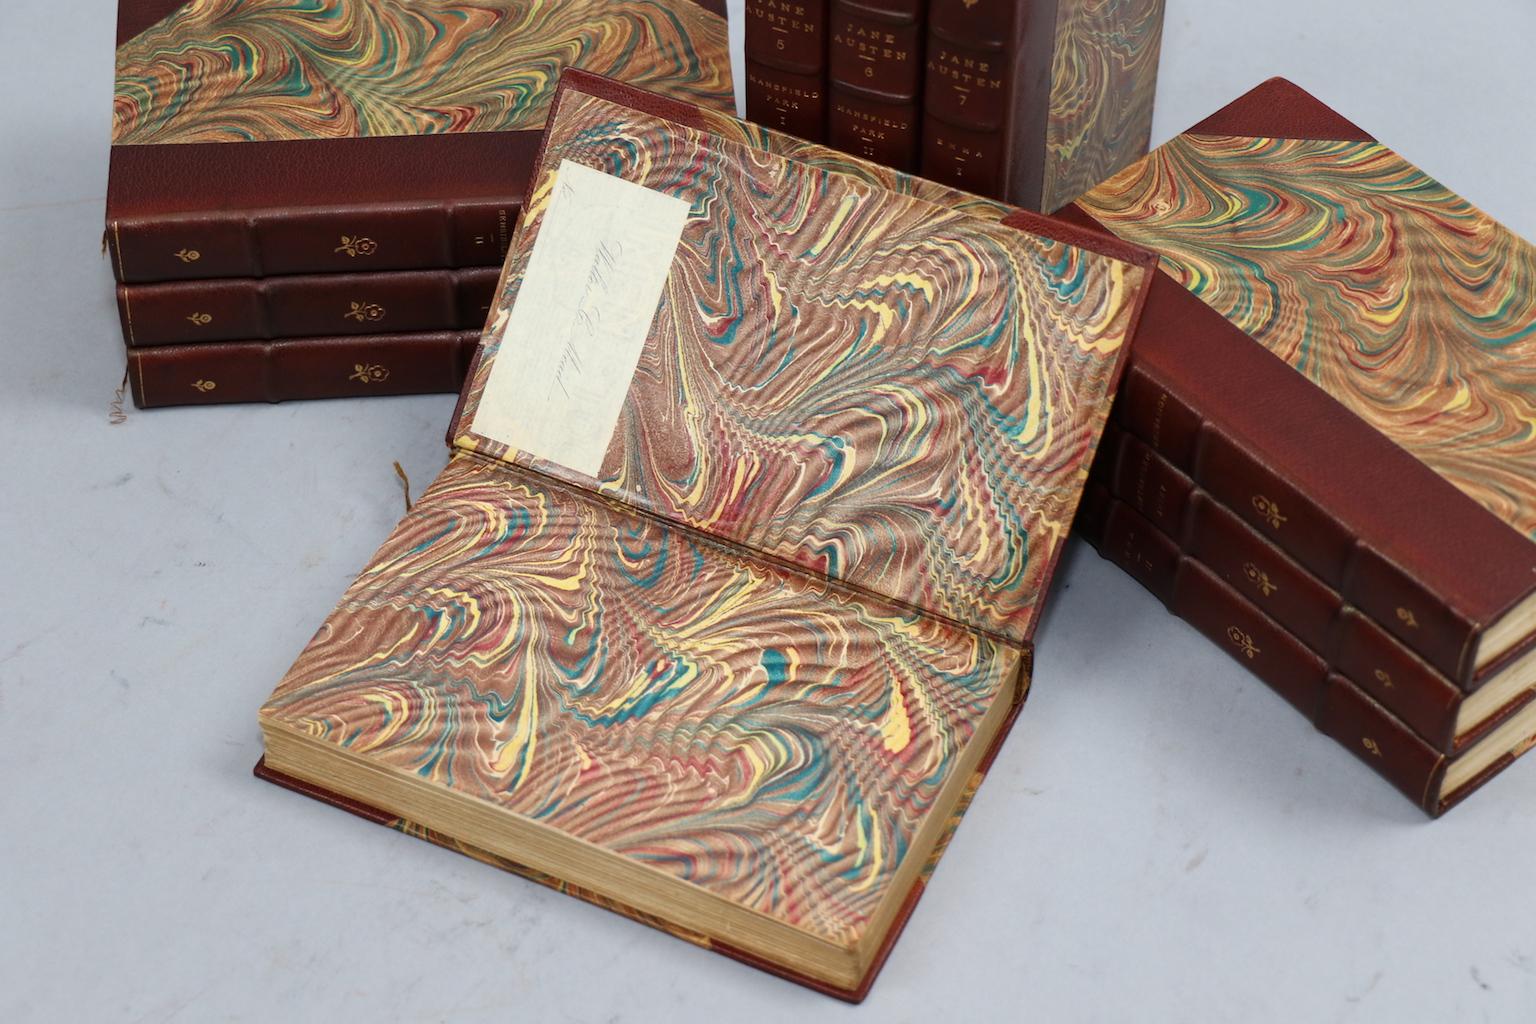 Early 20th Century Books, The Novels of Jane Austen, Edited by Brimley Johnson Winchester Edition